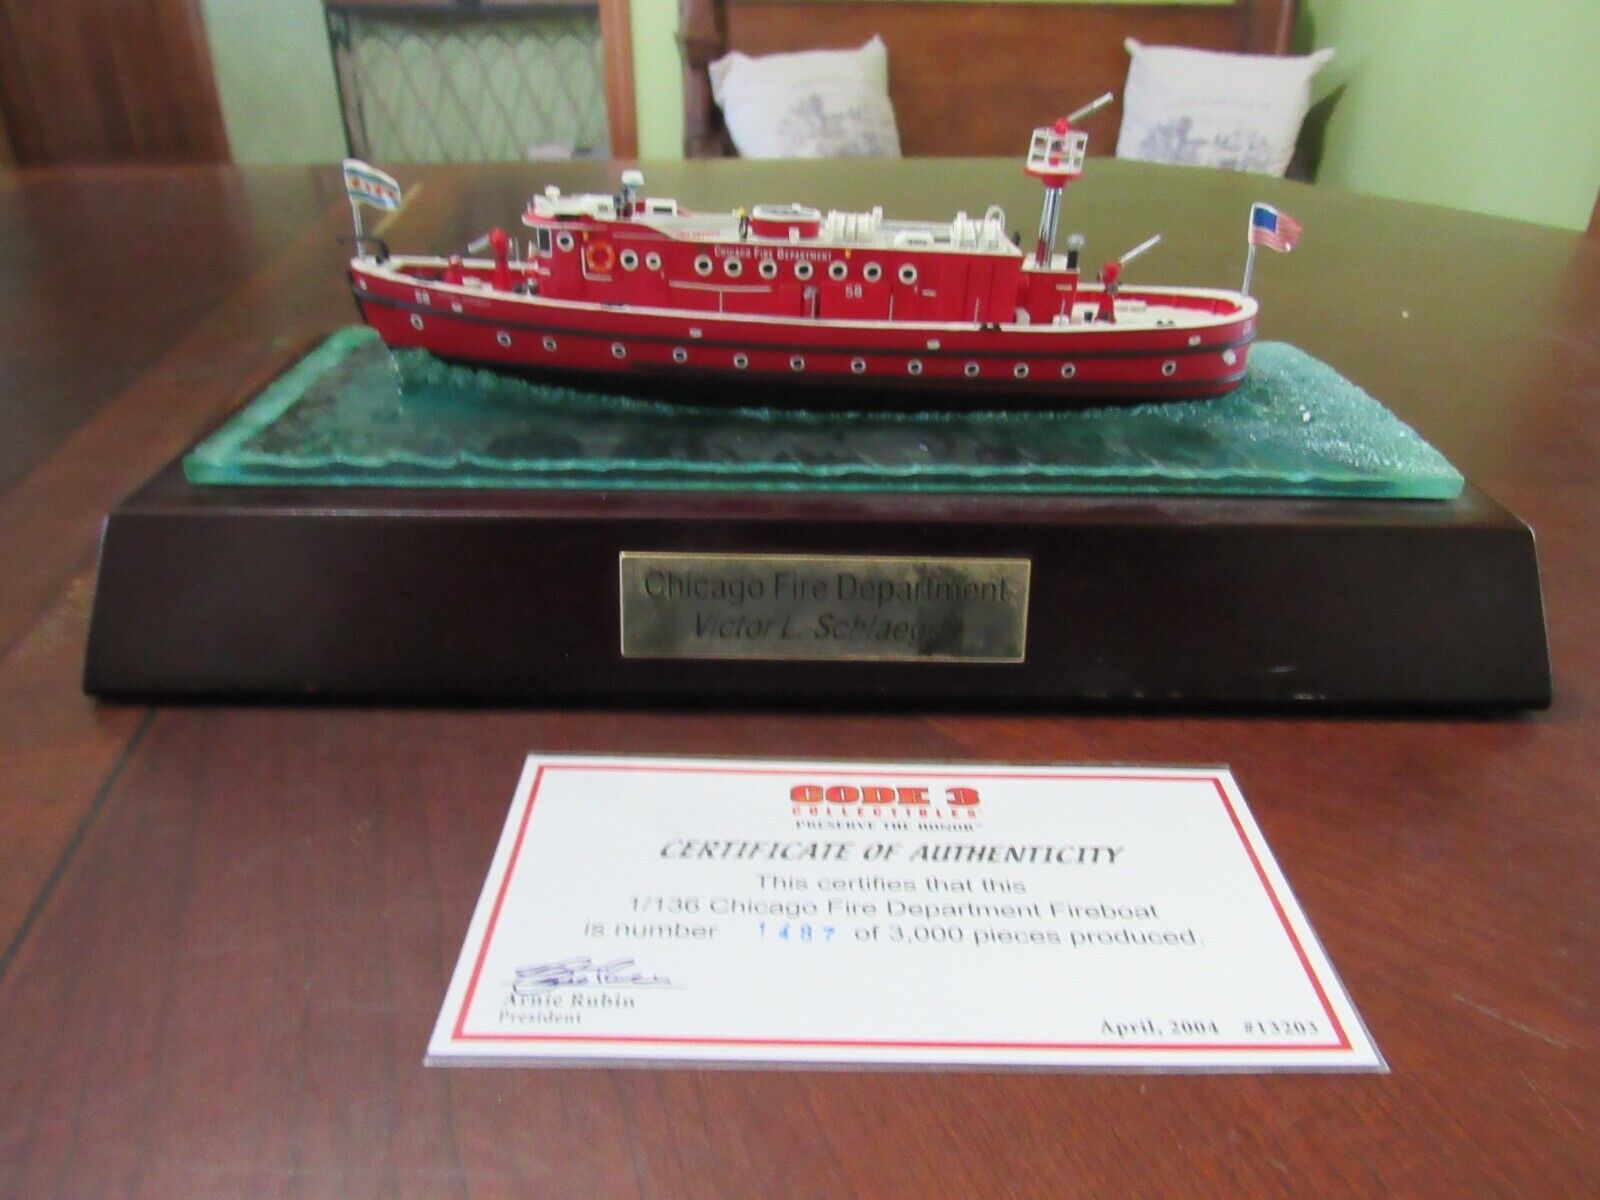 CODE 3 1/136 SCALE CHICAGO FD FIREBOAT VICTOR L. SCHLAGER - DAMAGED FIRE CANNON